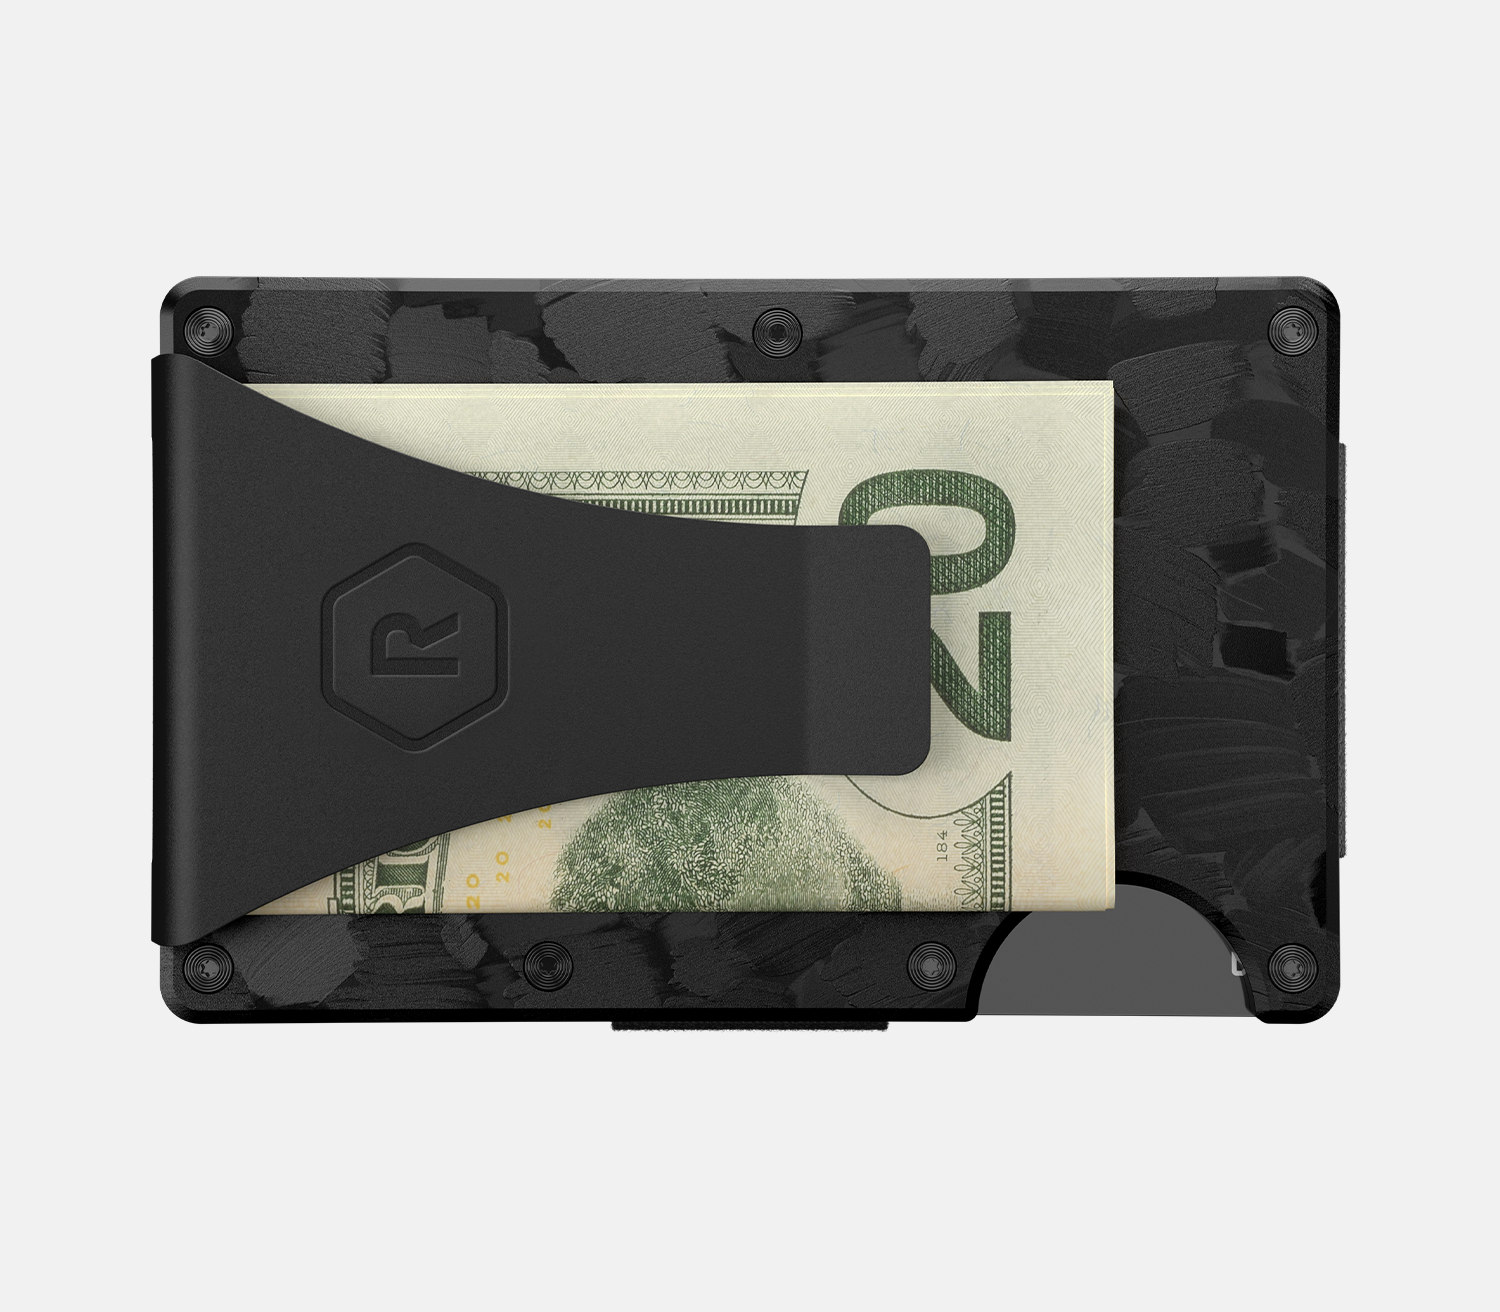 Slim & Strong Forged Carbon Wallet | The Ridge